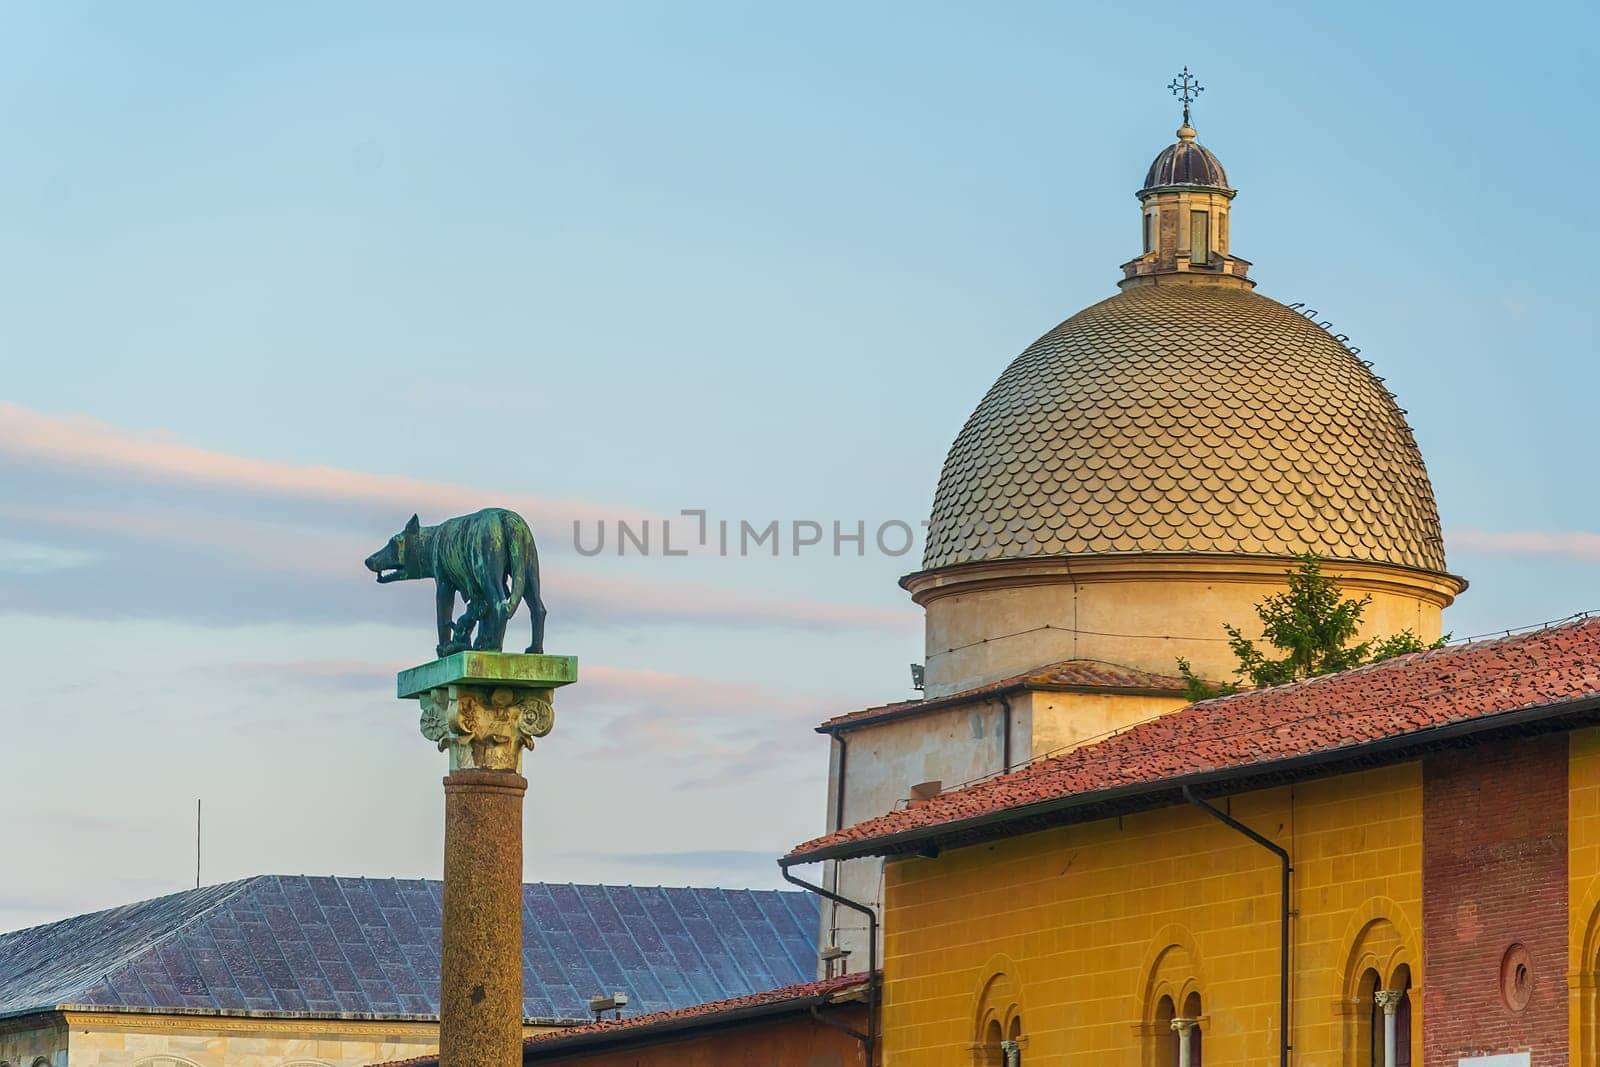 Pisa Cathedral and the Leaning Tower in Pisa by f11photo